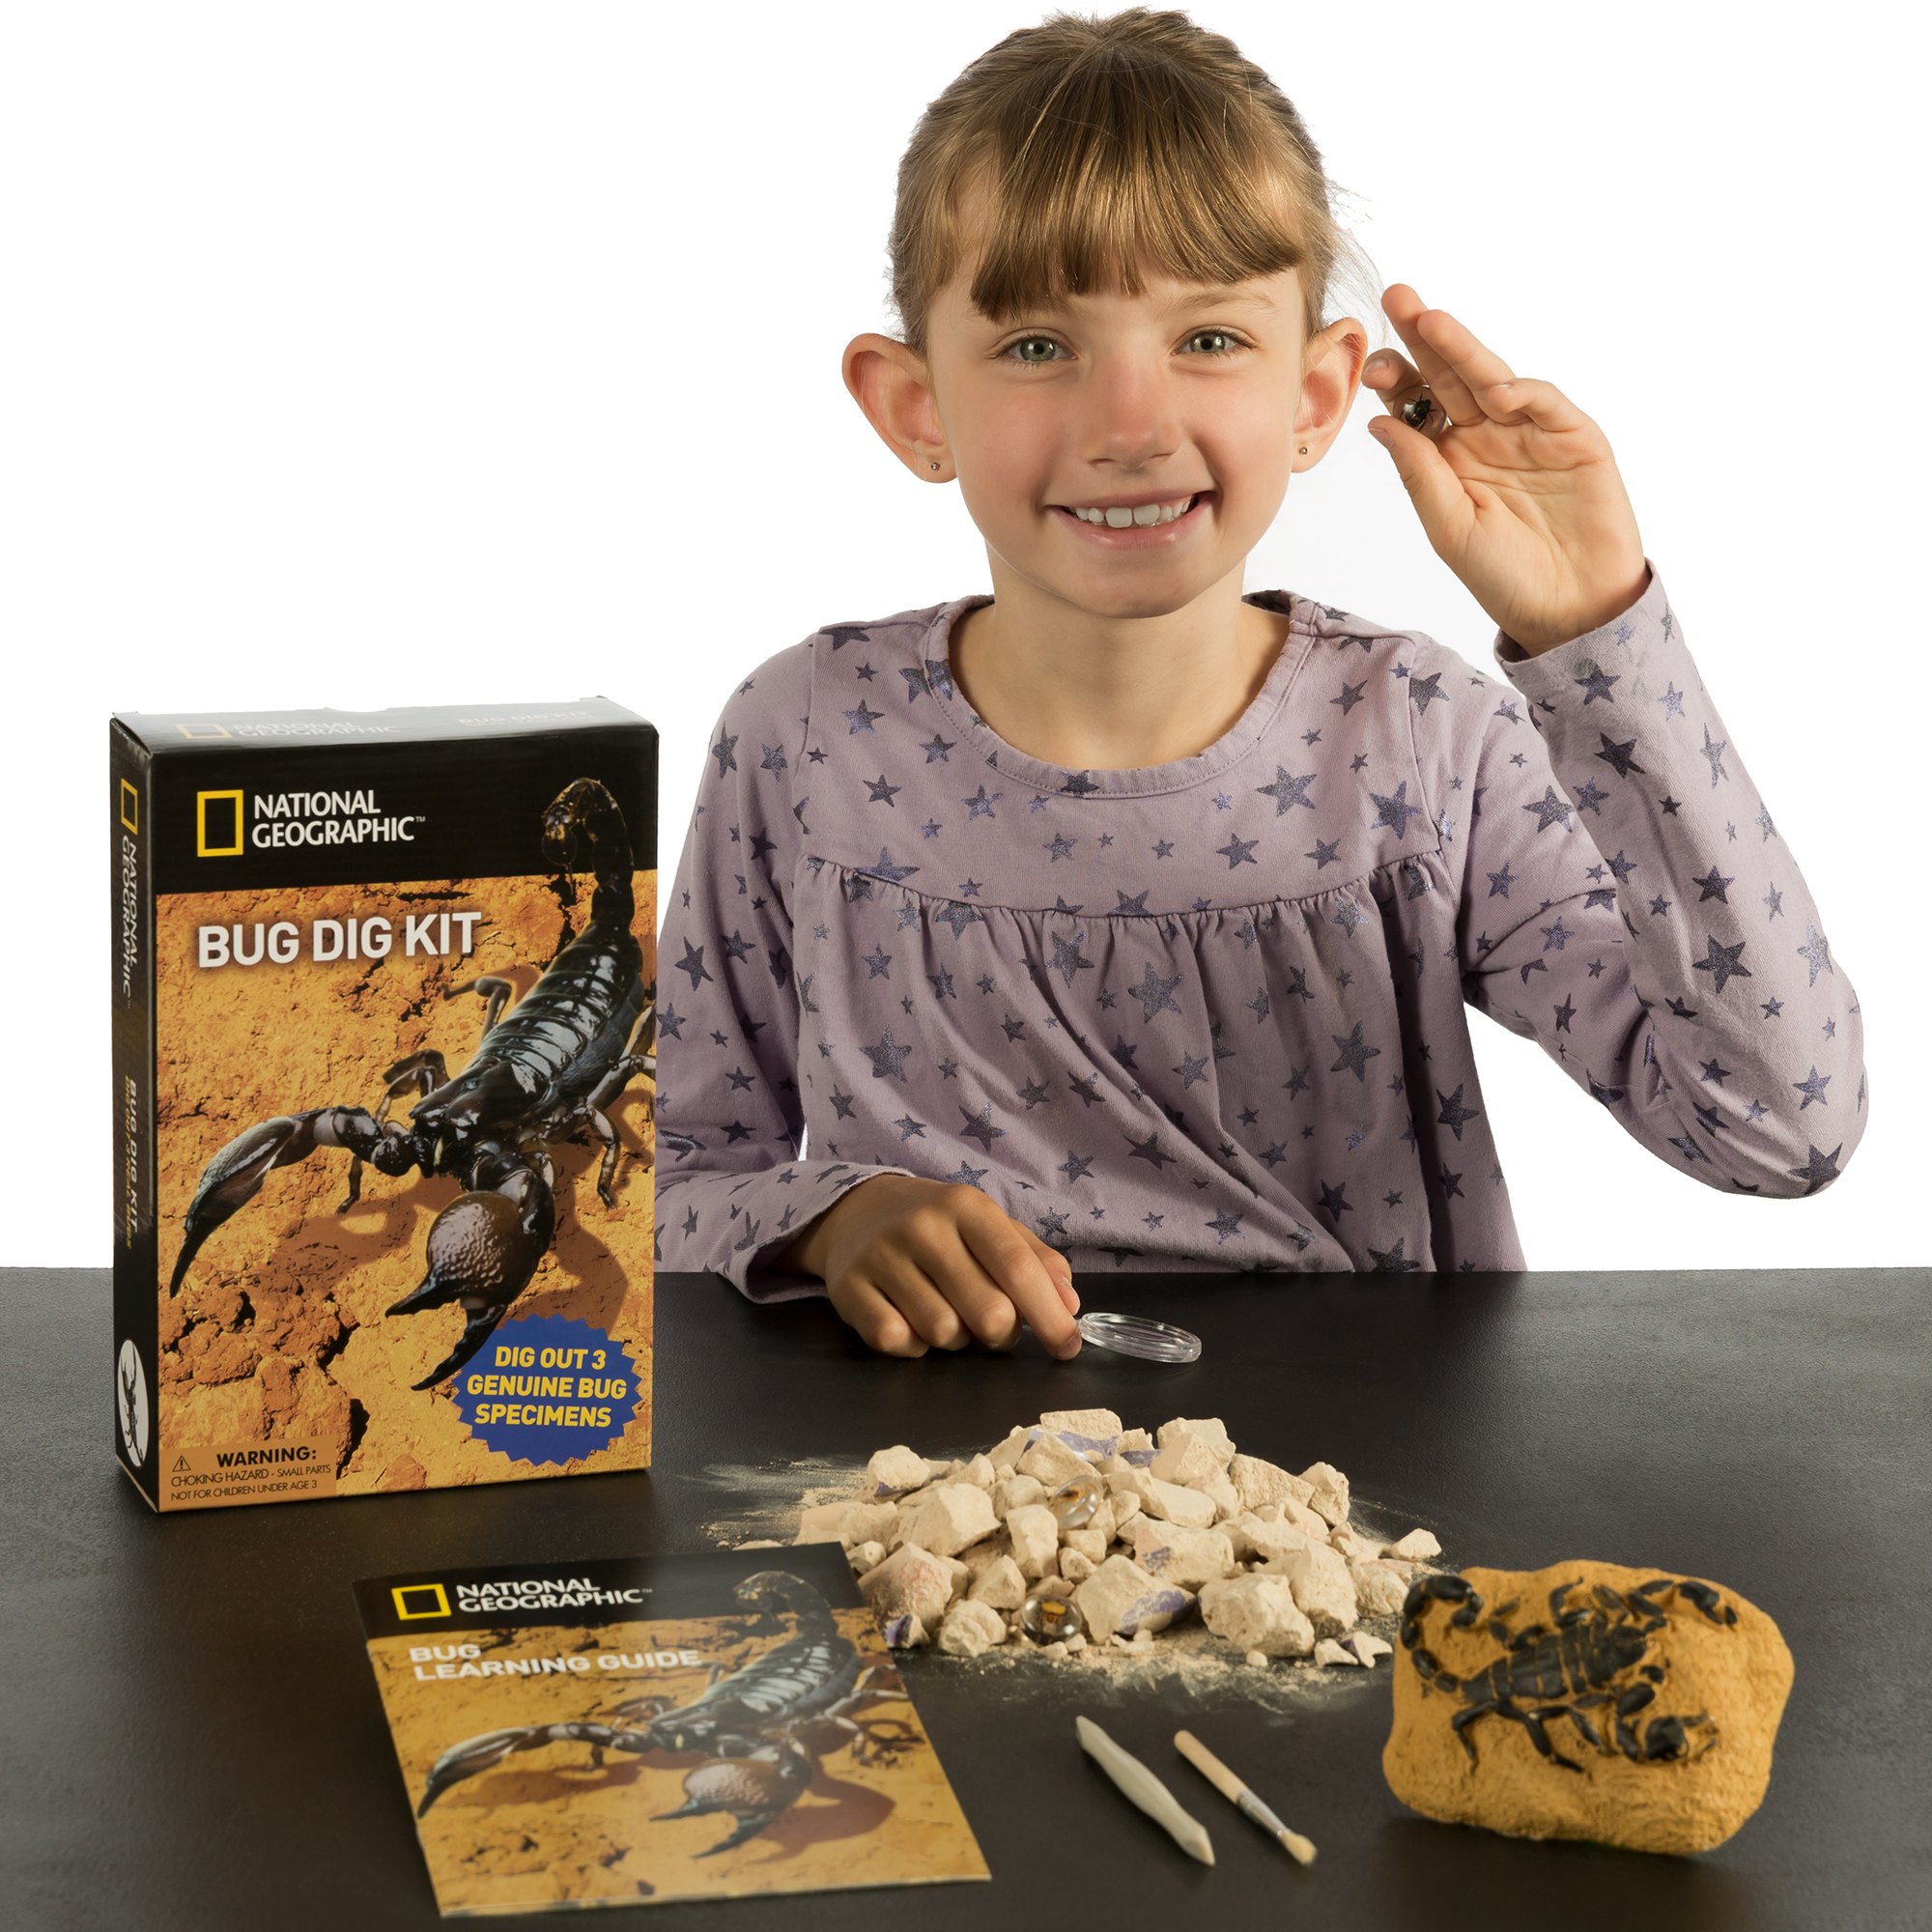 National Geographic Bug Dig Kit by 